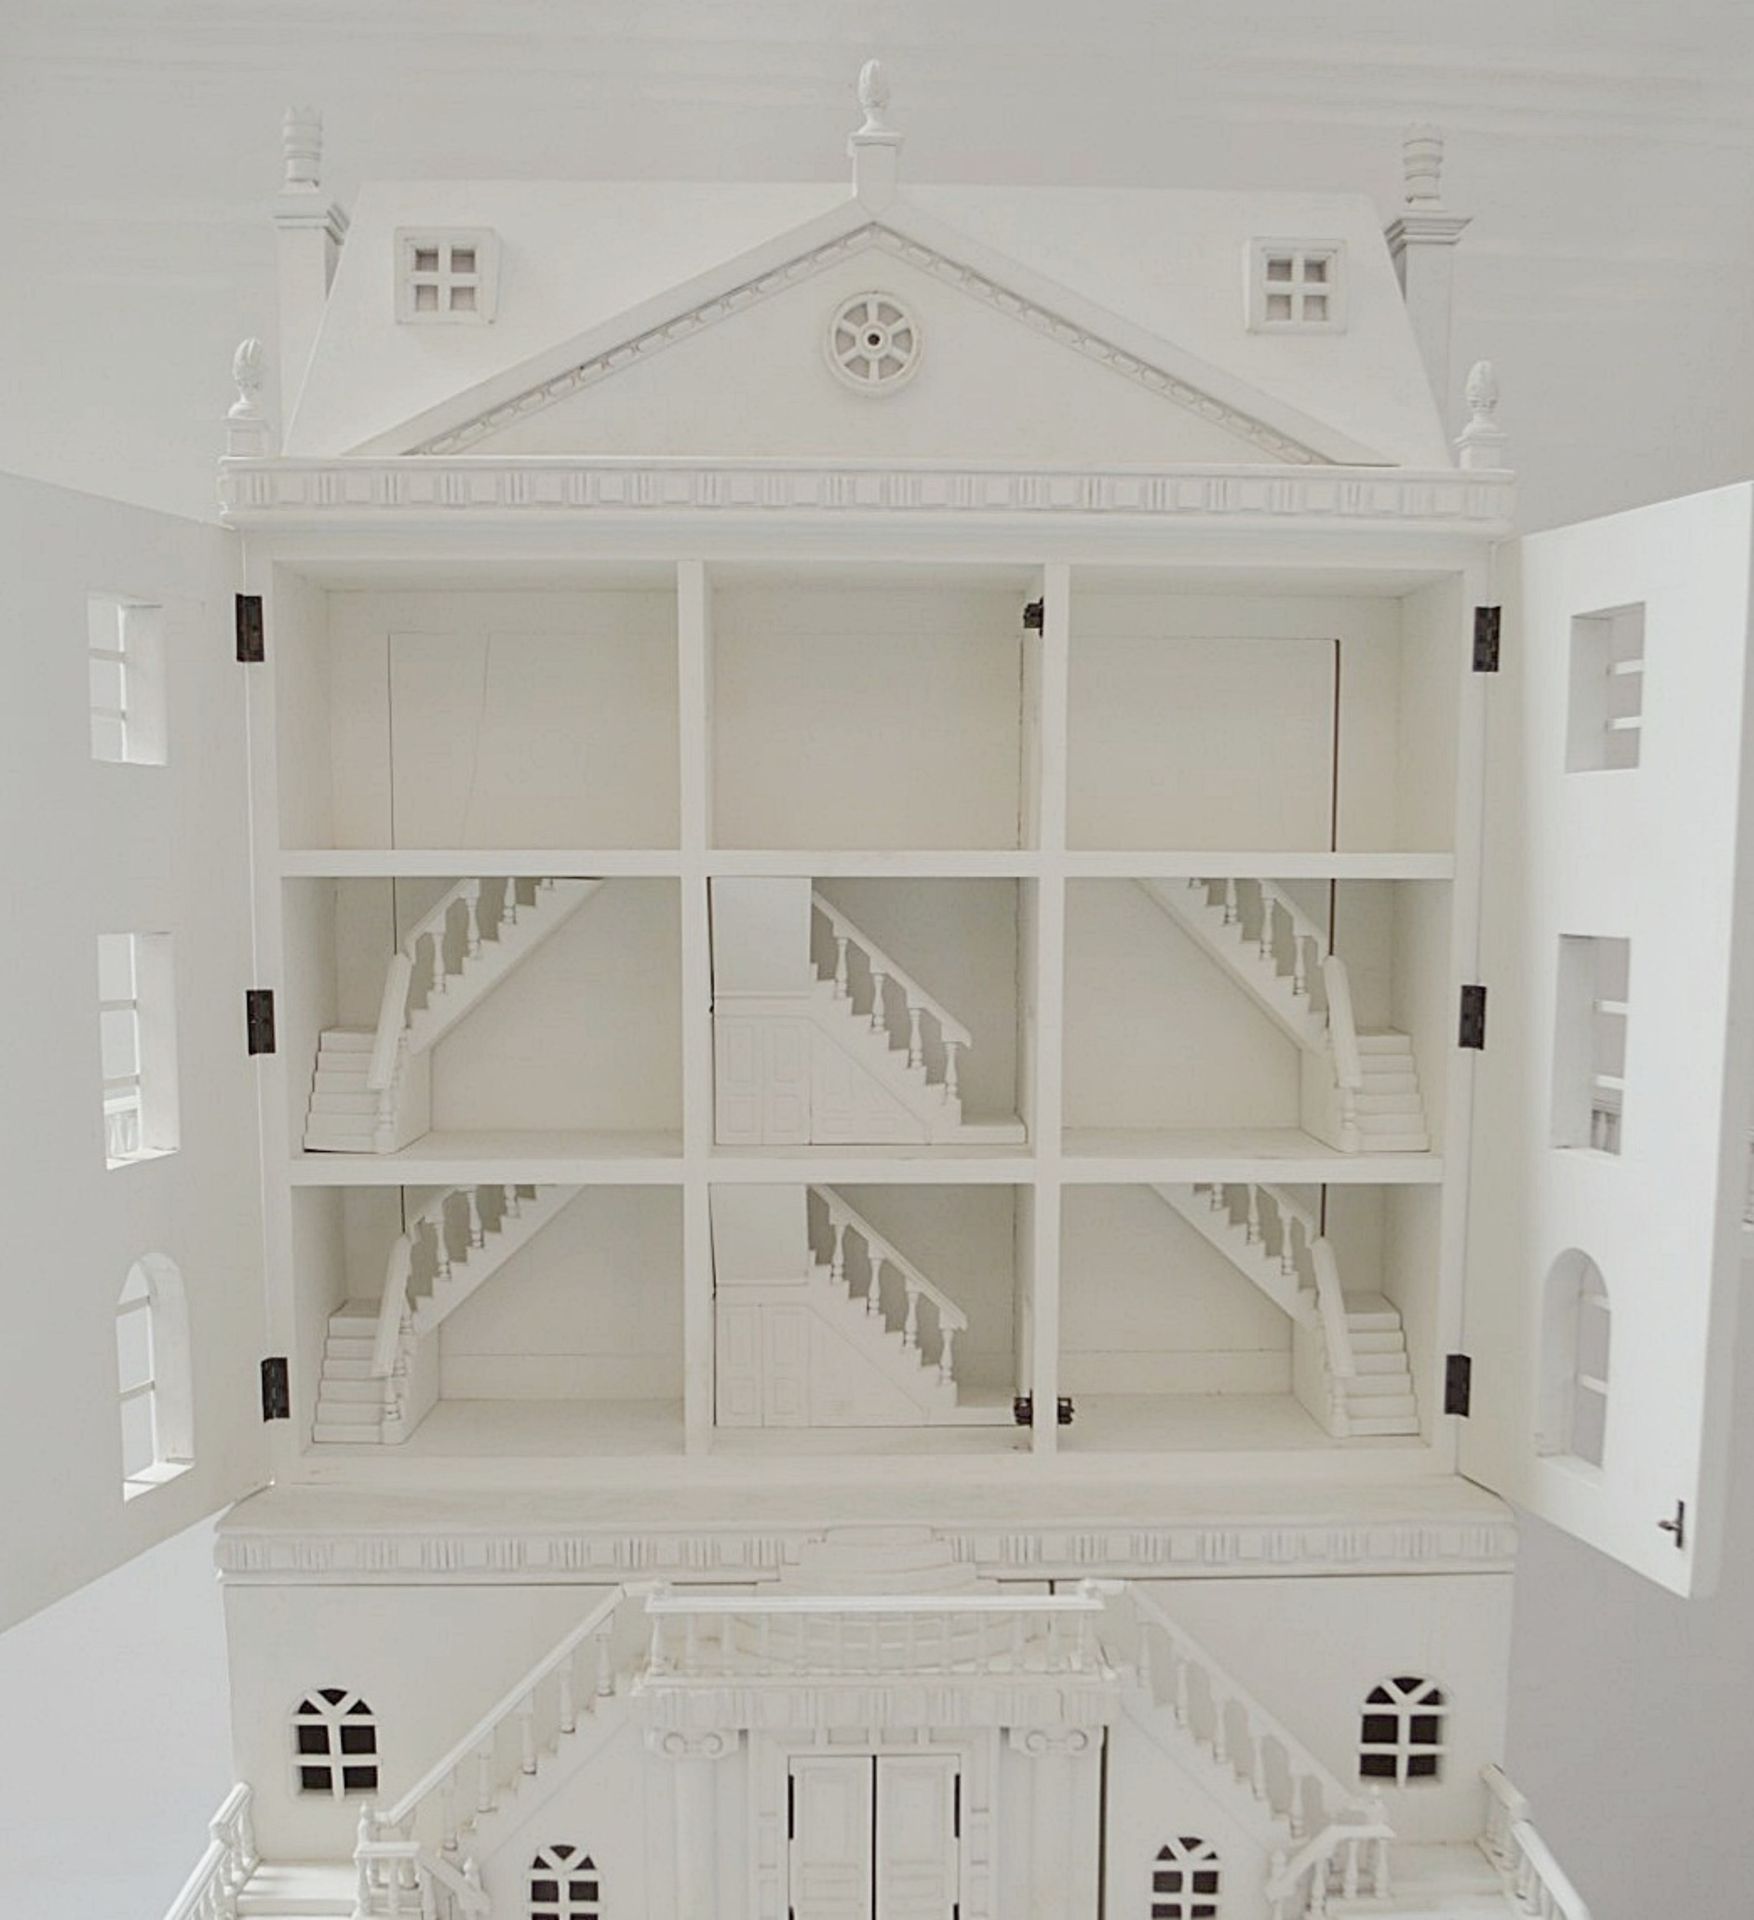 1 x Impressive Bespoke Hand Crafted Wooden Dolls House In White - Image 9 of 19